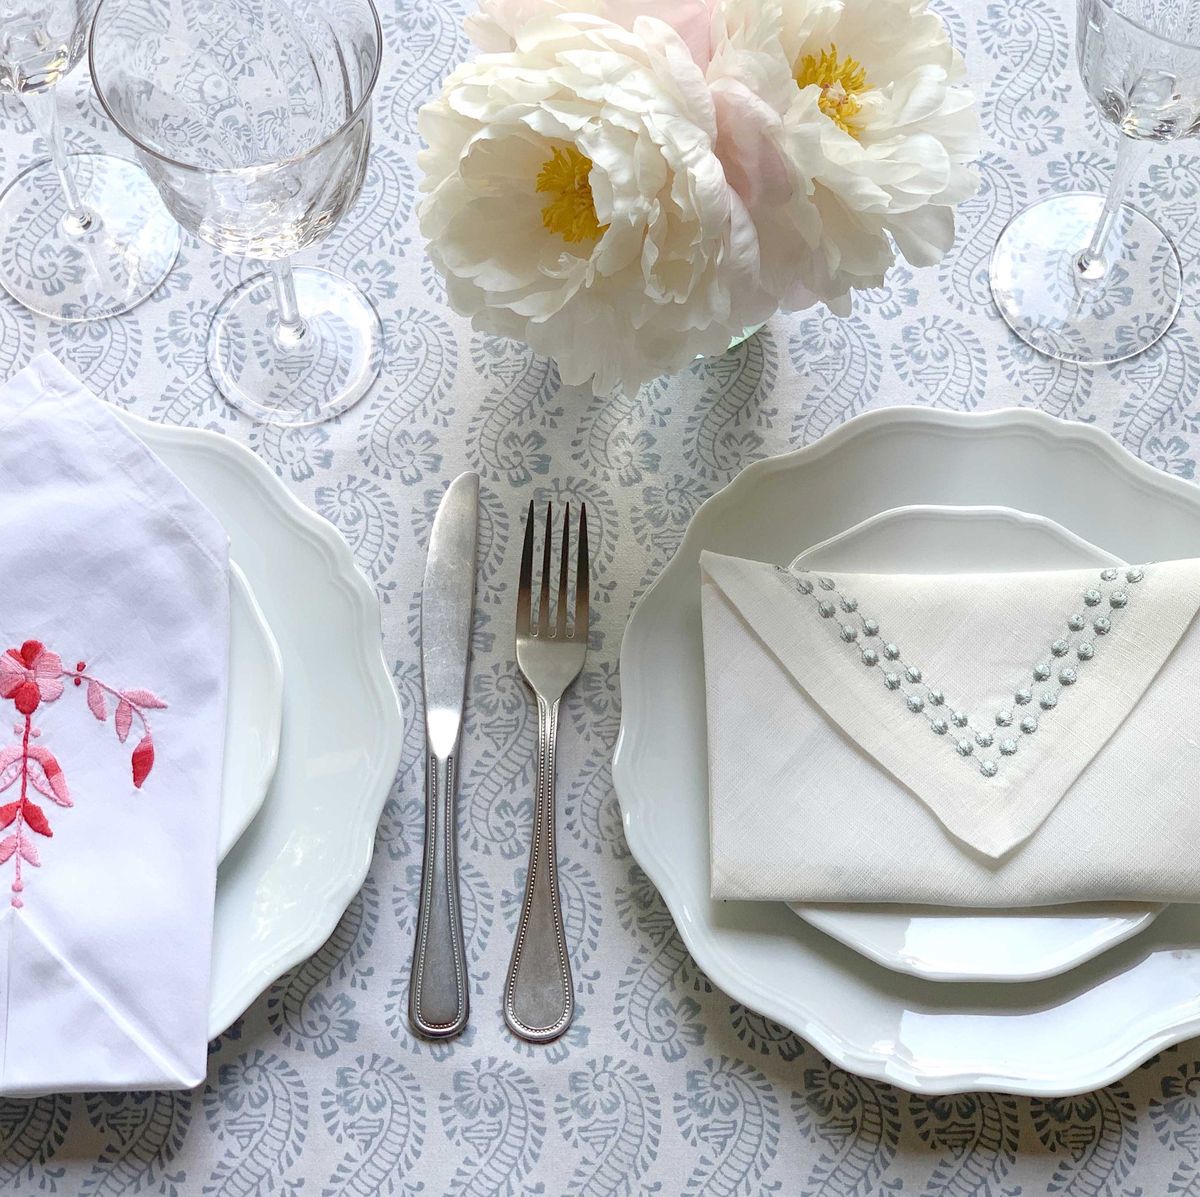 How to Fold a Napkin 8 Easy Ways for Your Next Dinner Party